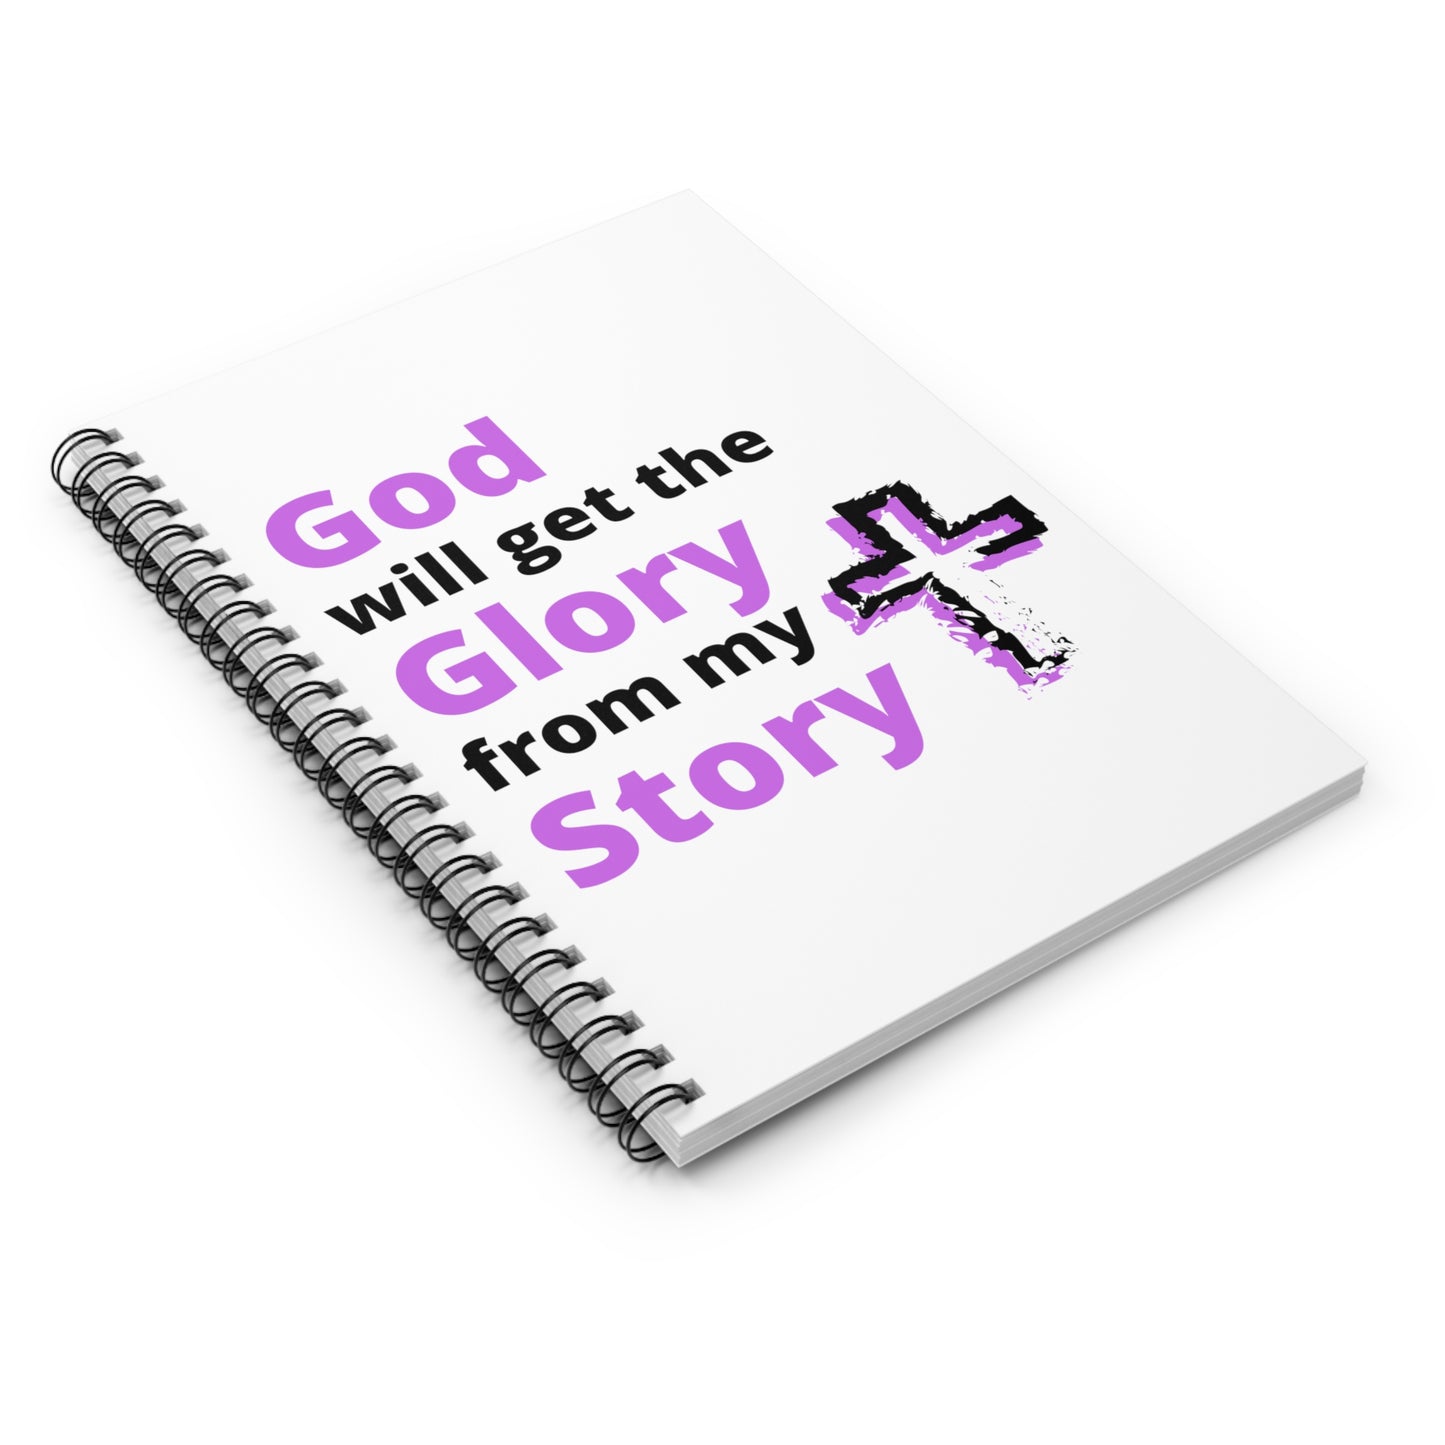 God will get the Glory from my Story (Purple) Spiral Notebook - Ruled Line